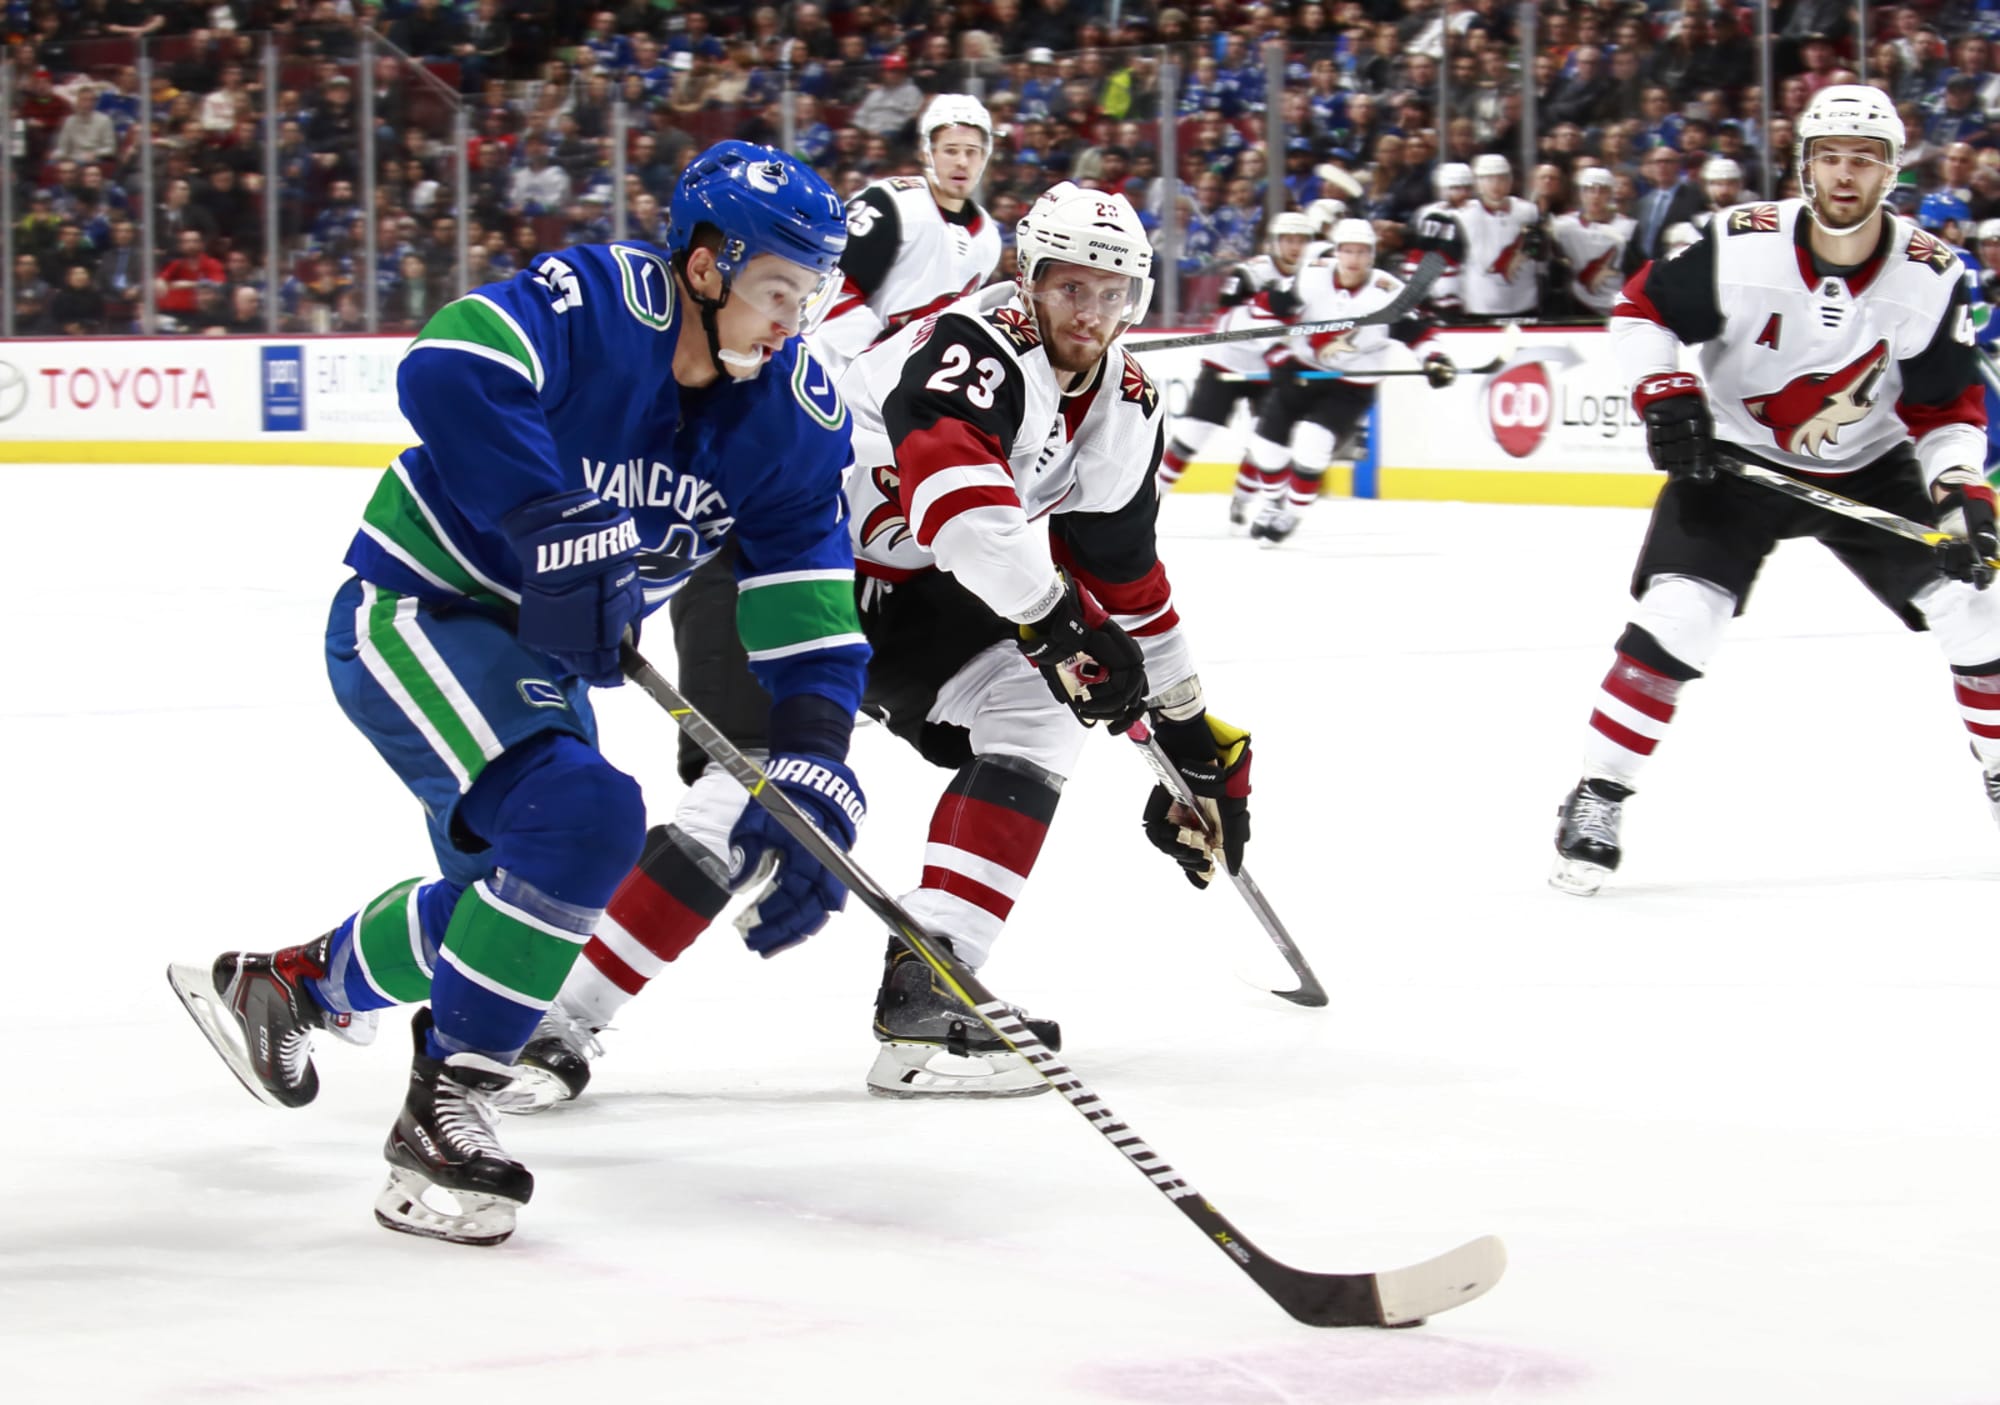 Vancouver Canucks Final February games have major playoff implications